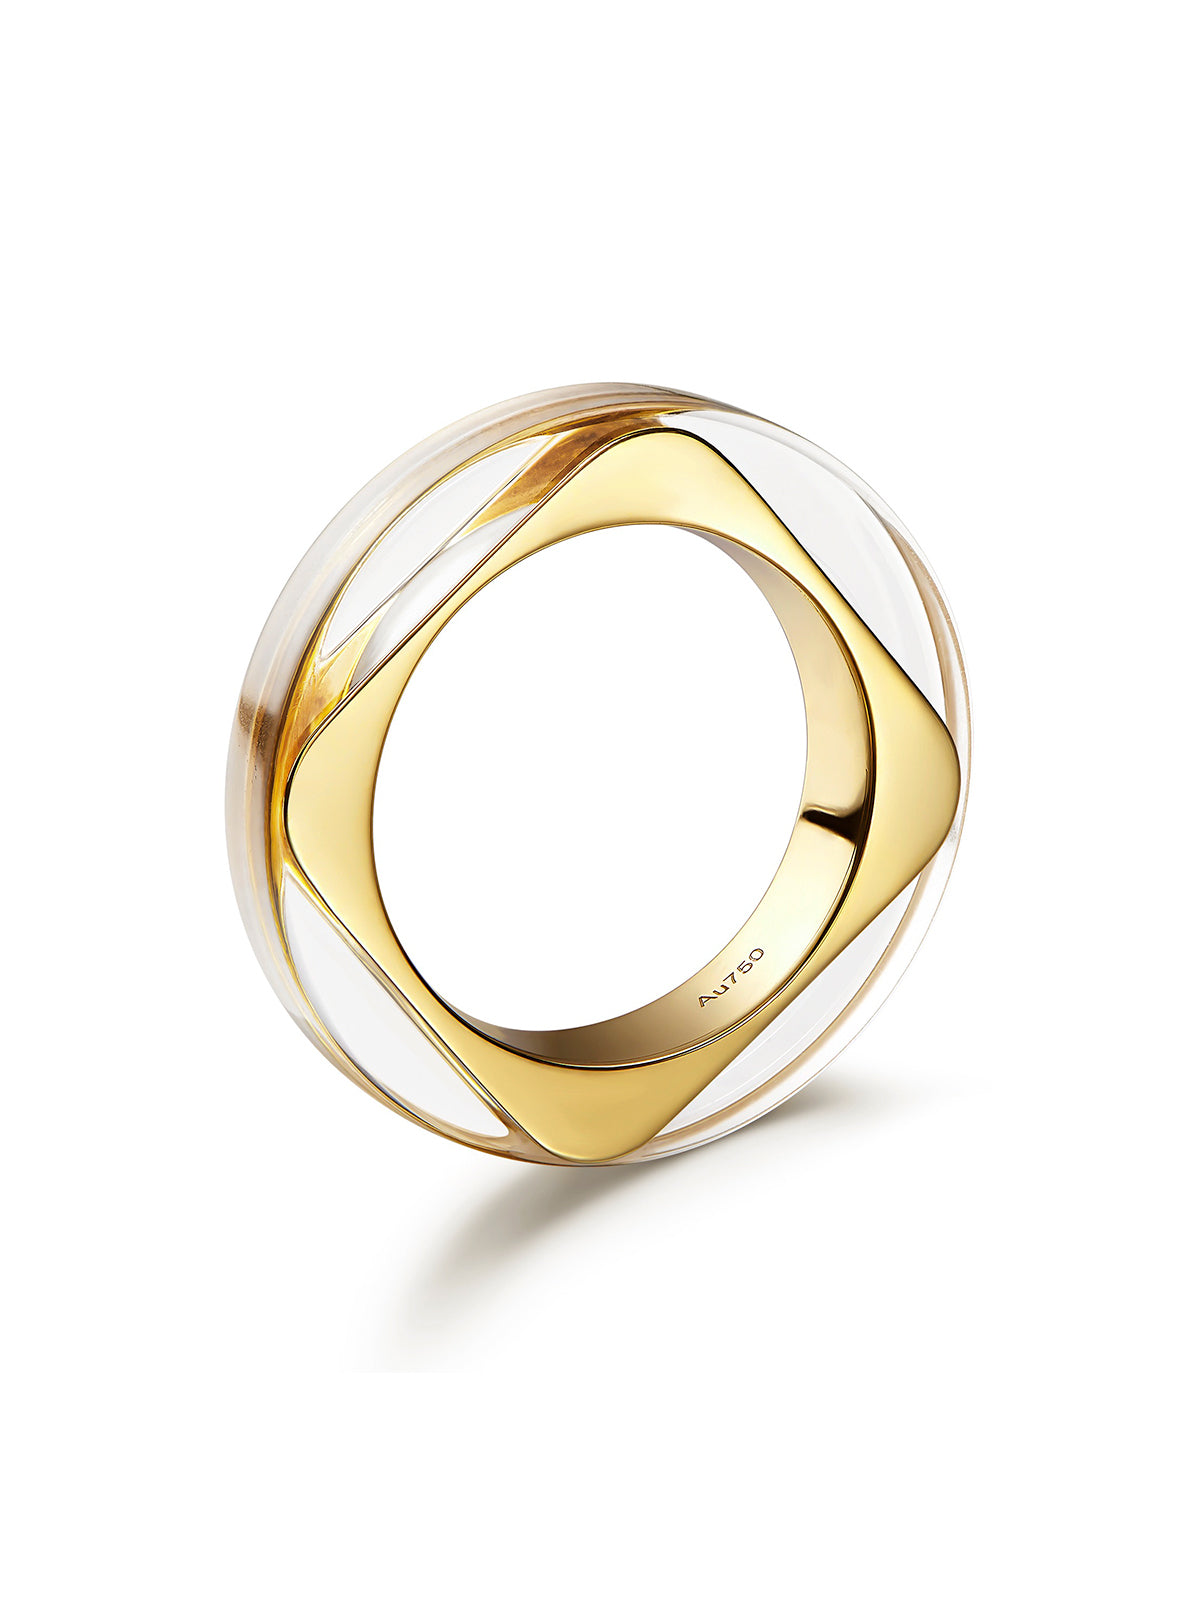 Square & Round I Minimalistic Two Tier Ring